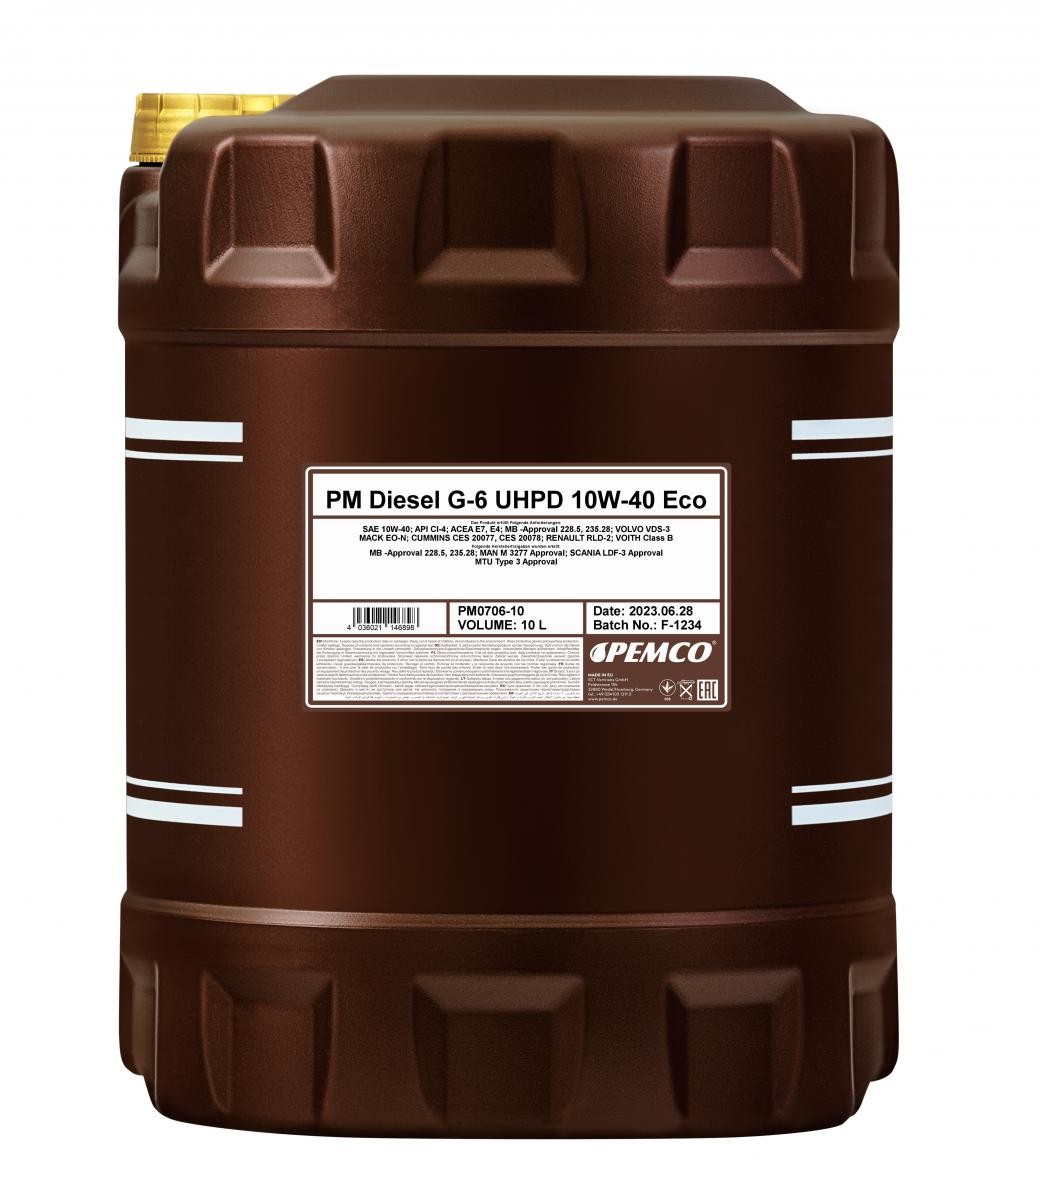 Auto oil MB 228.5 PEMCO - PM0706-10 Truck UHPD, DIESEL G-6 Eco